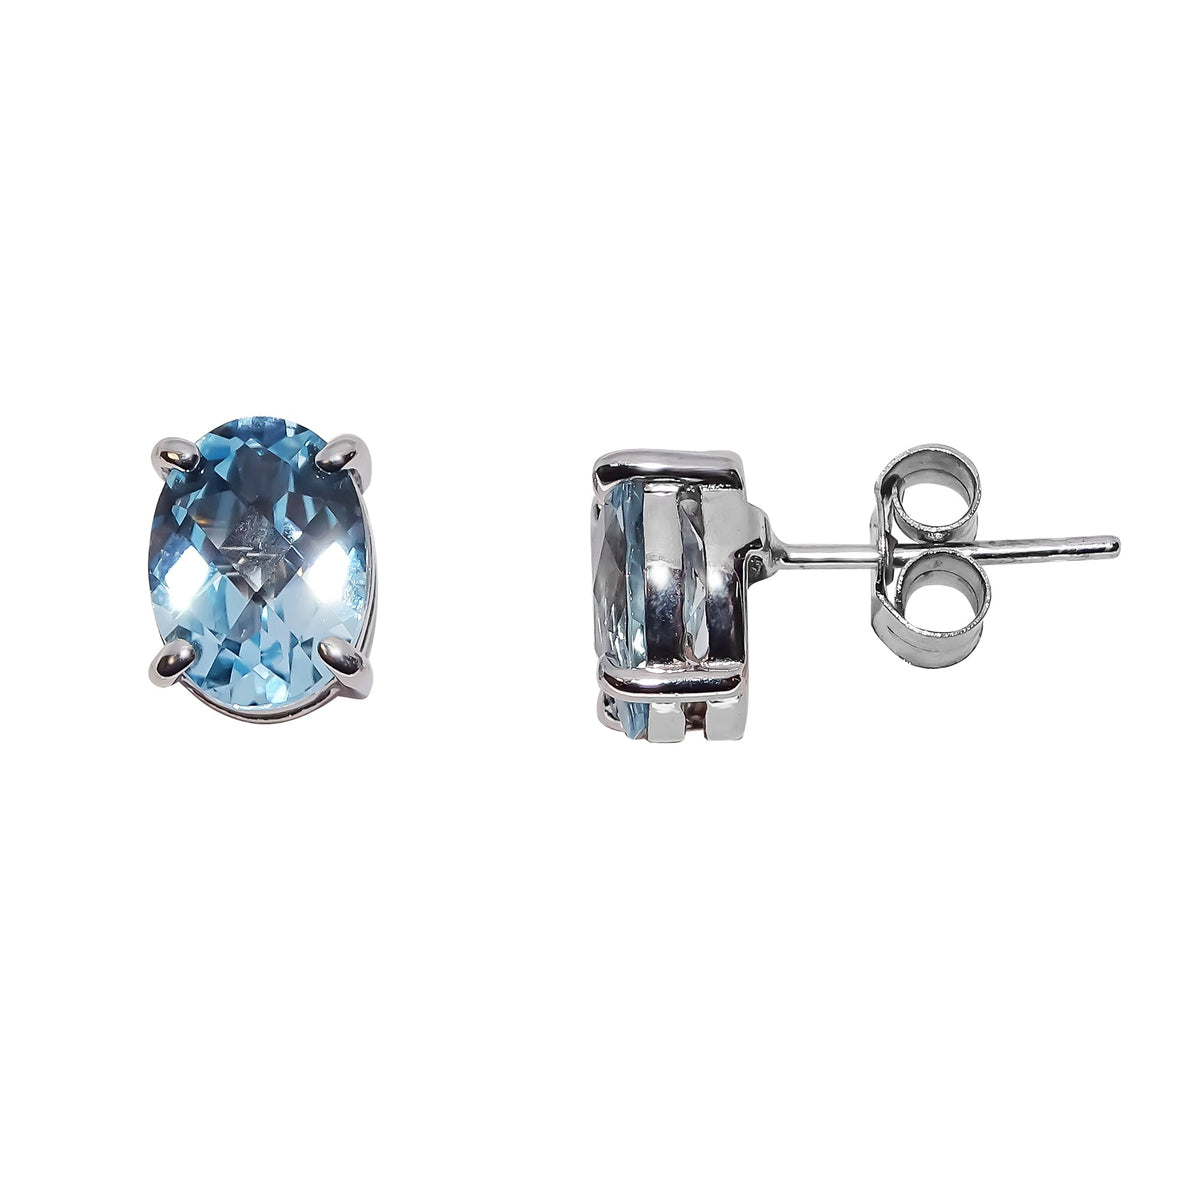 9ct white gold checkerboard 8x6mm oval blue topaz stud earrings